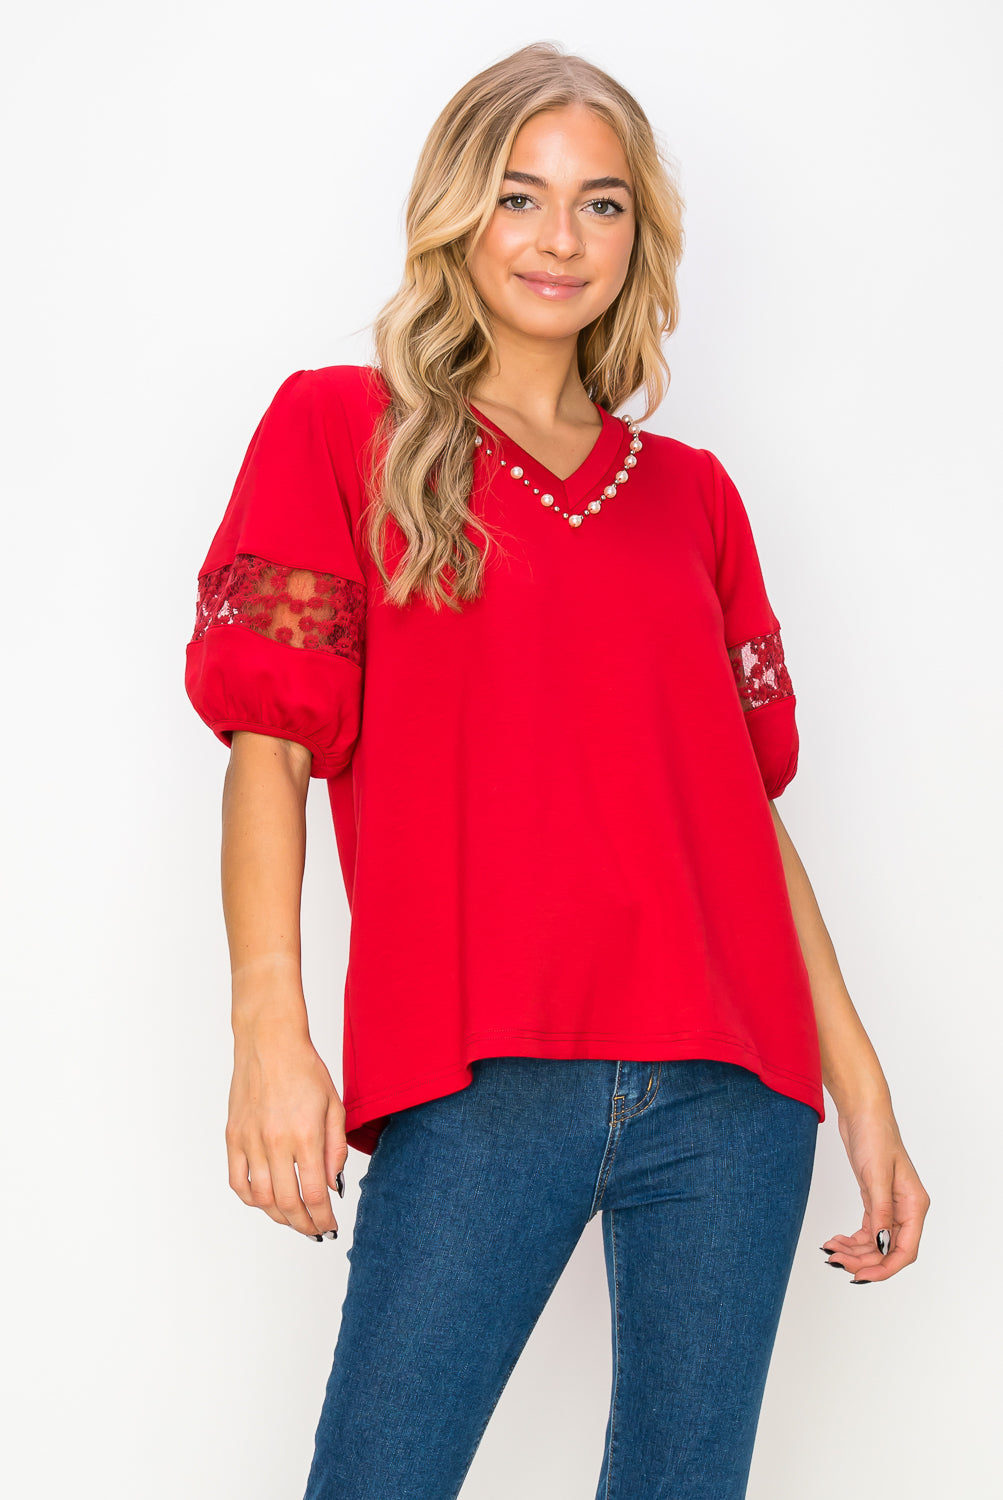 Katrina Pointe Knit Top with Pearls